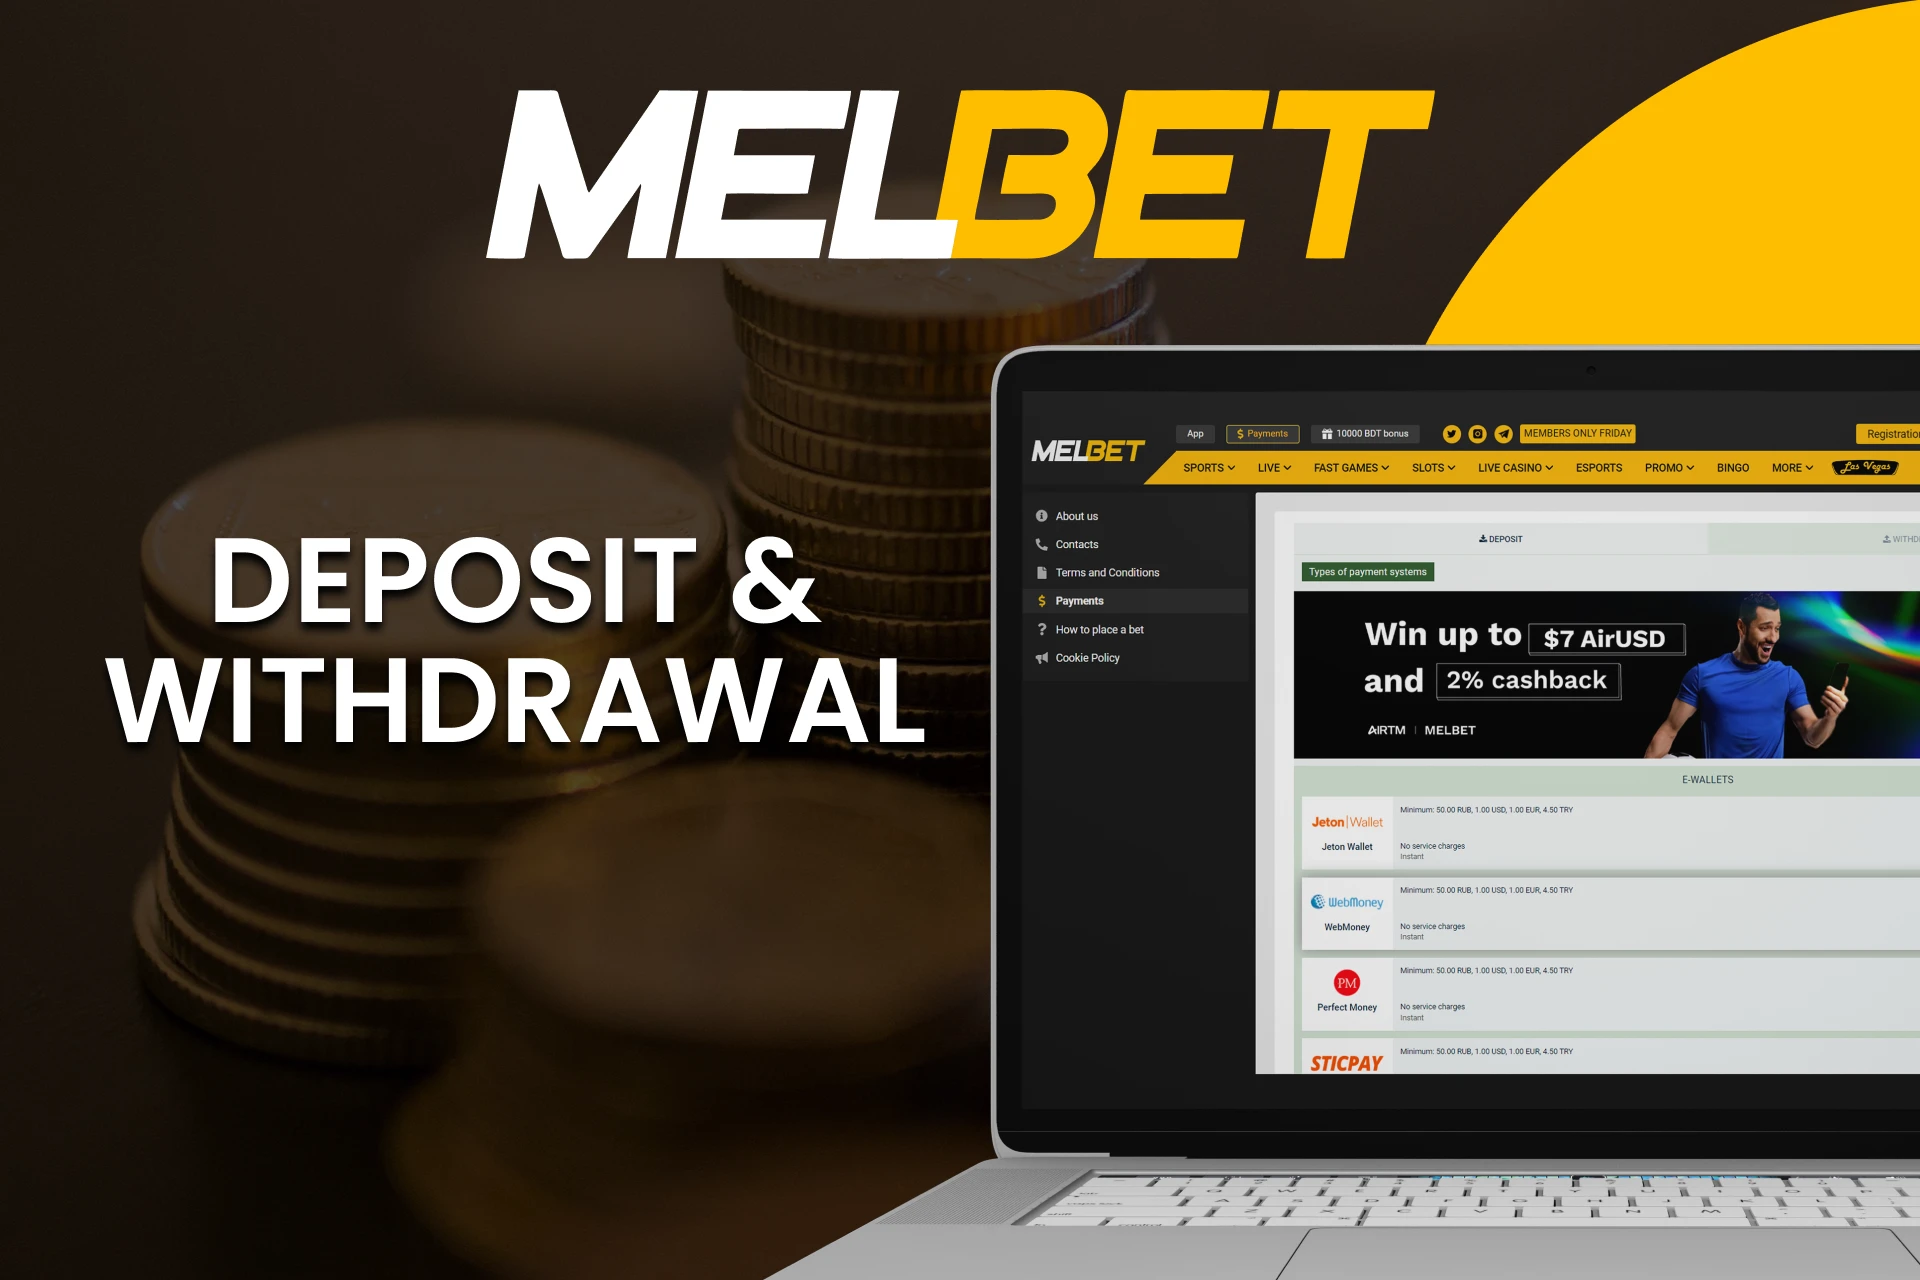 Find out about payment systems on Melbet.